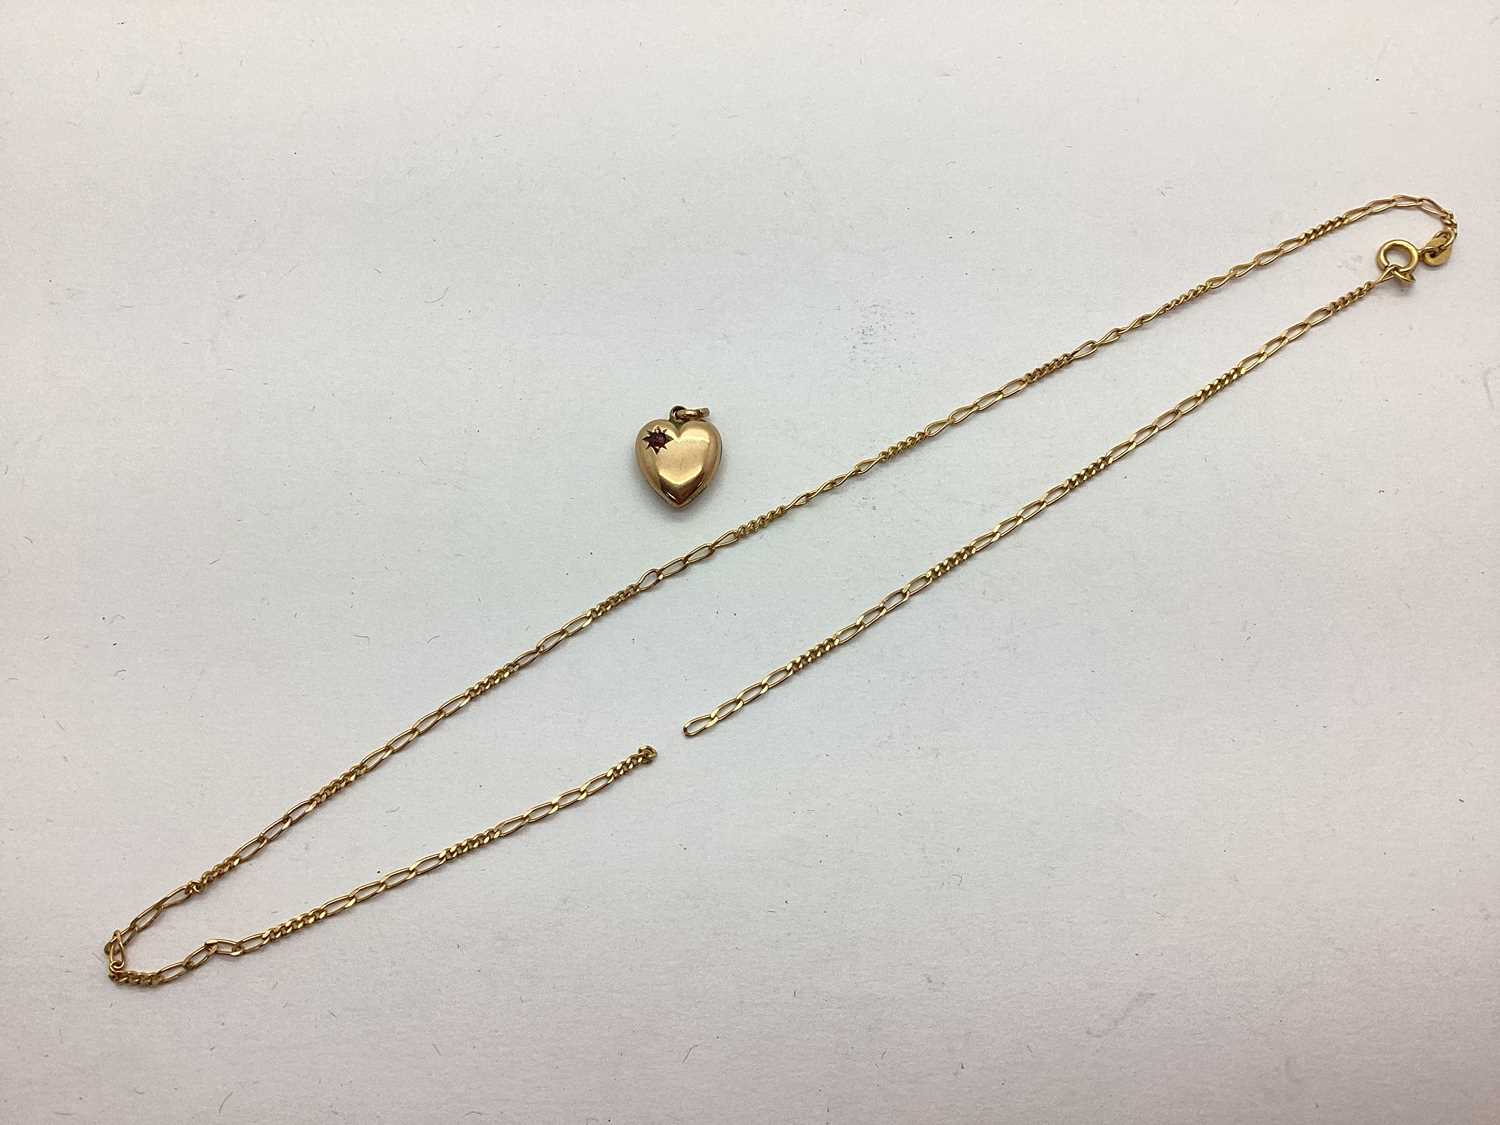 A 9ct Gold Dainty Figaro Link Chain (broken); together with a 9ct gold heart-shaped pendant, the